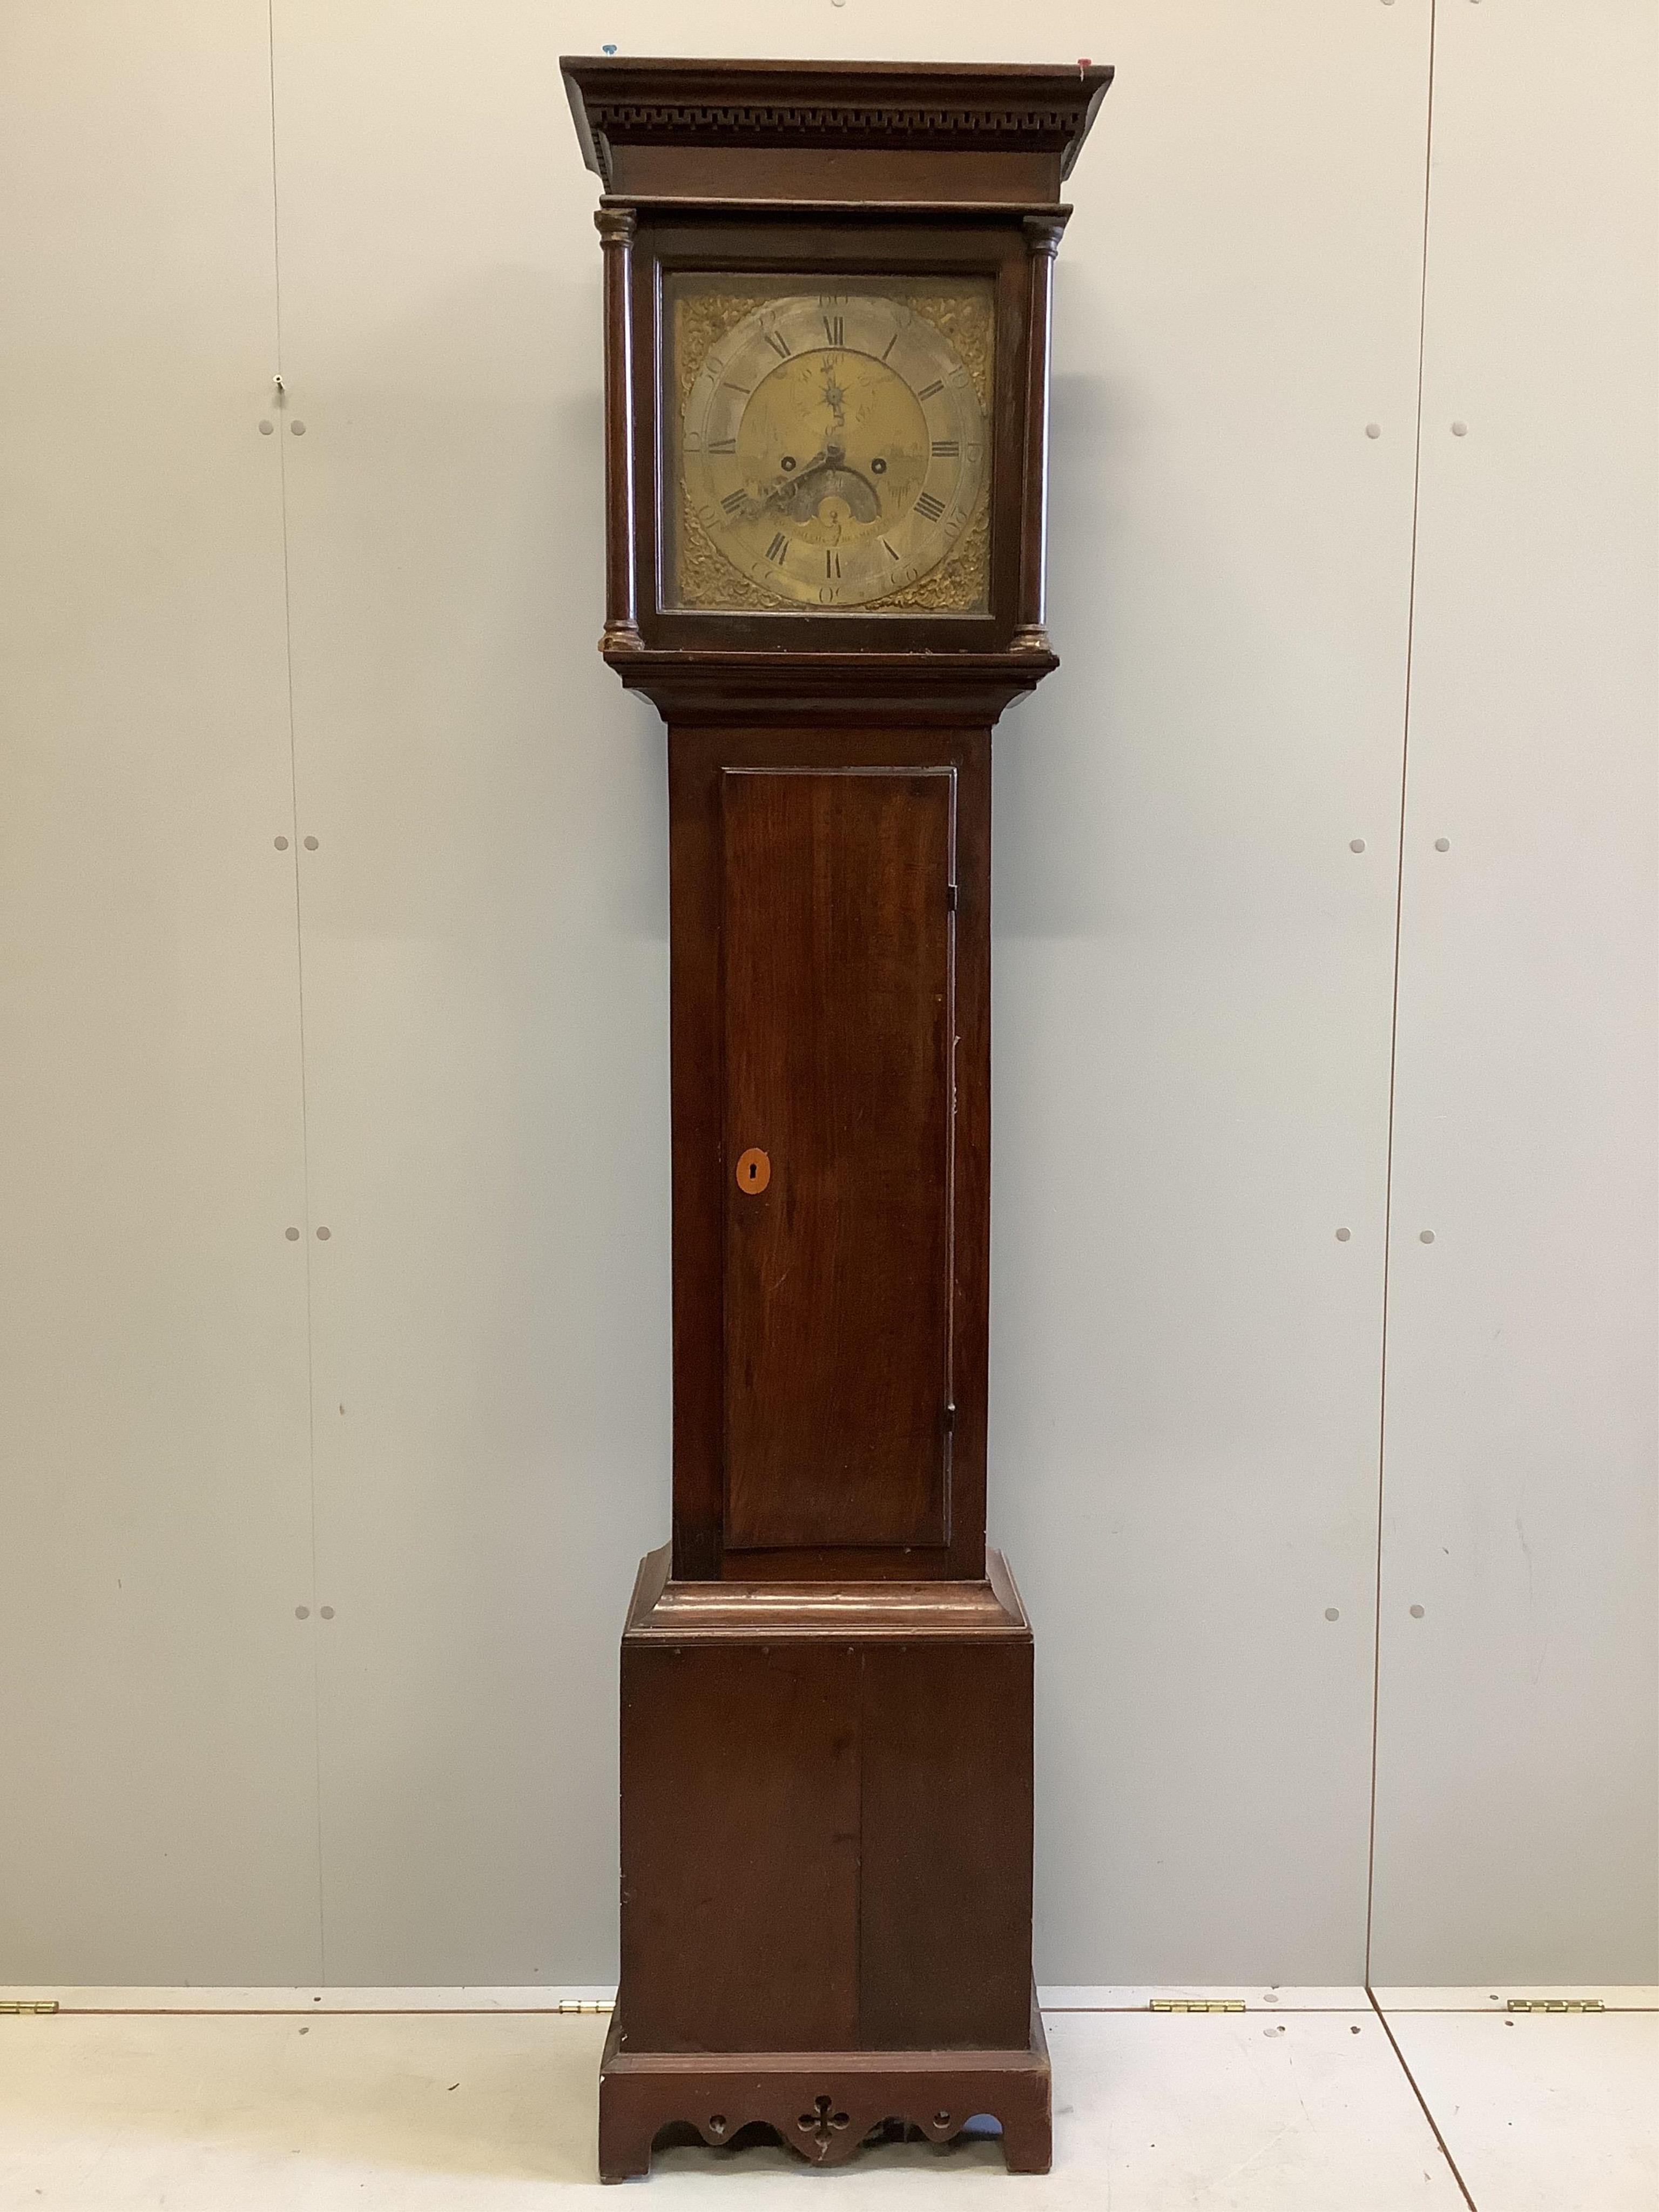 George Smith, Beaminster, a George III oak eight day longcase clock, height 199cm. Condition - fair